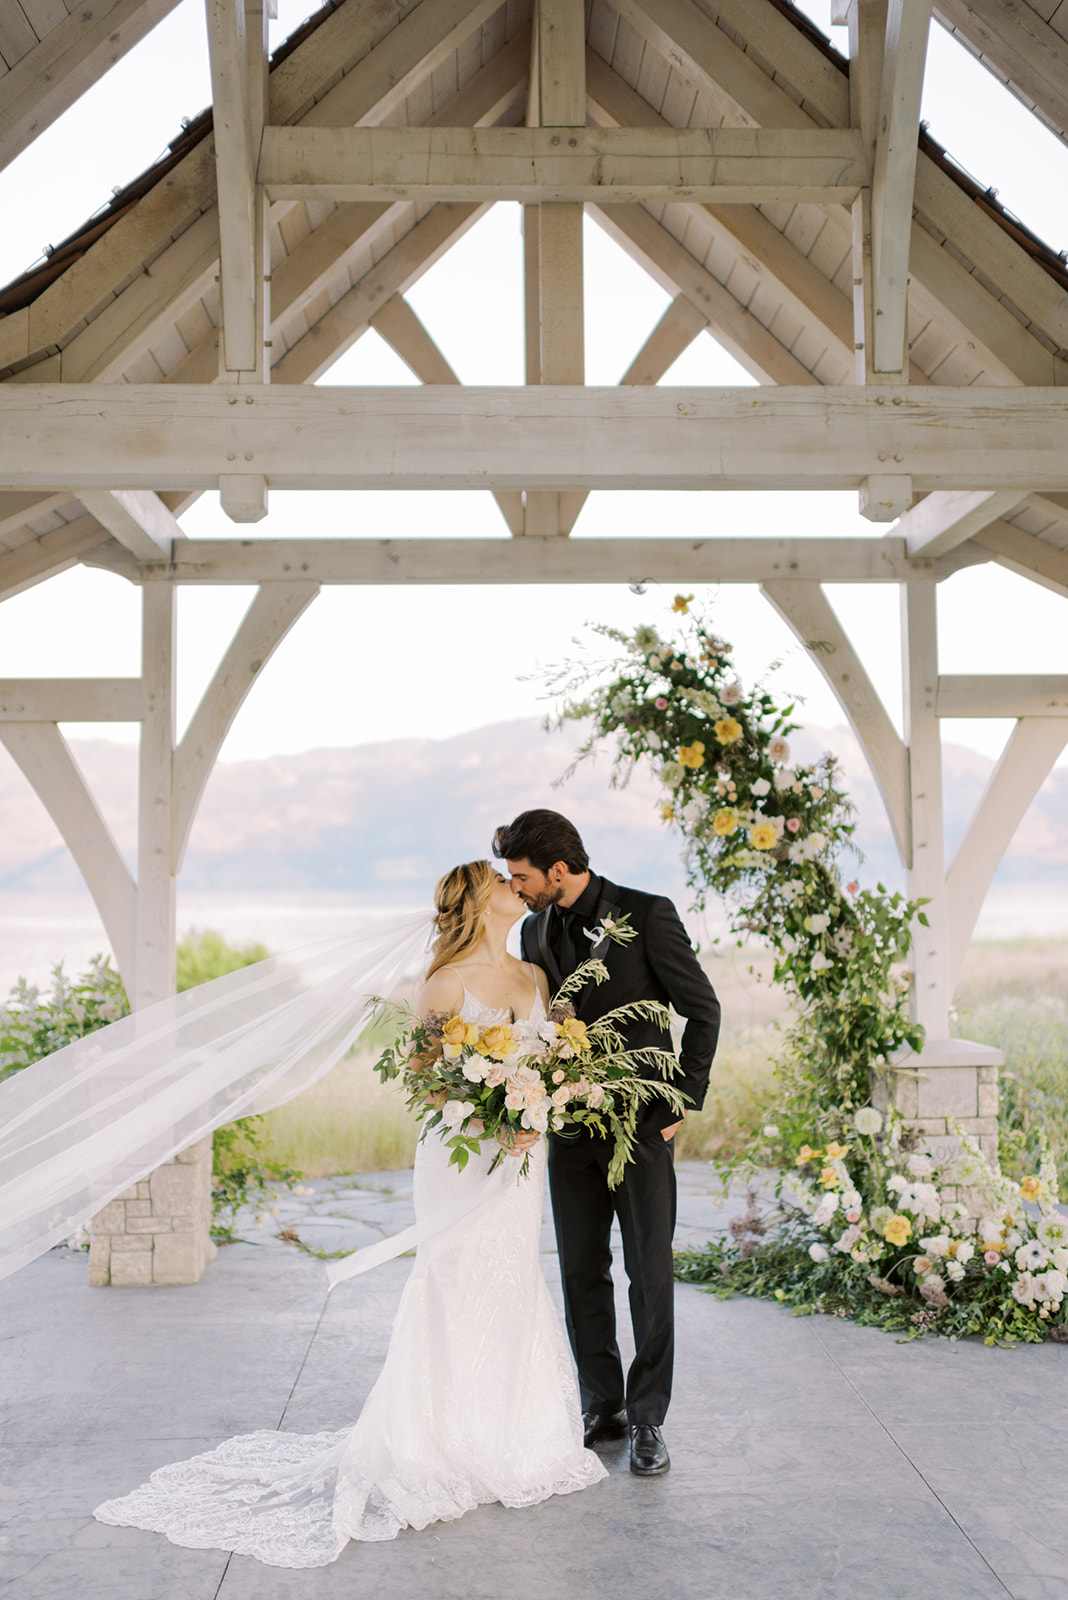 Golden-toned Florals and Black Tie Attire in this Sanctuary Gardens Styled Wedding Inspiration